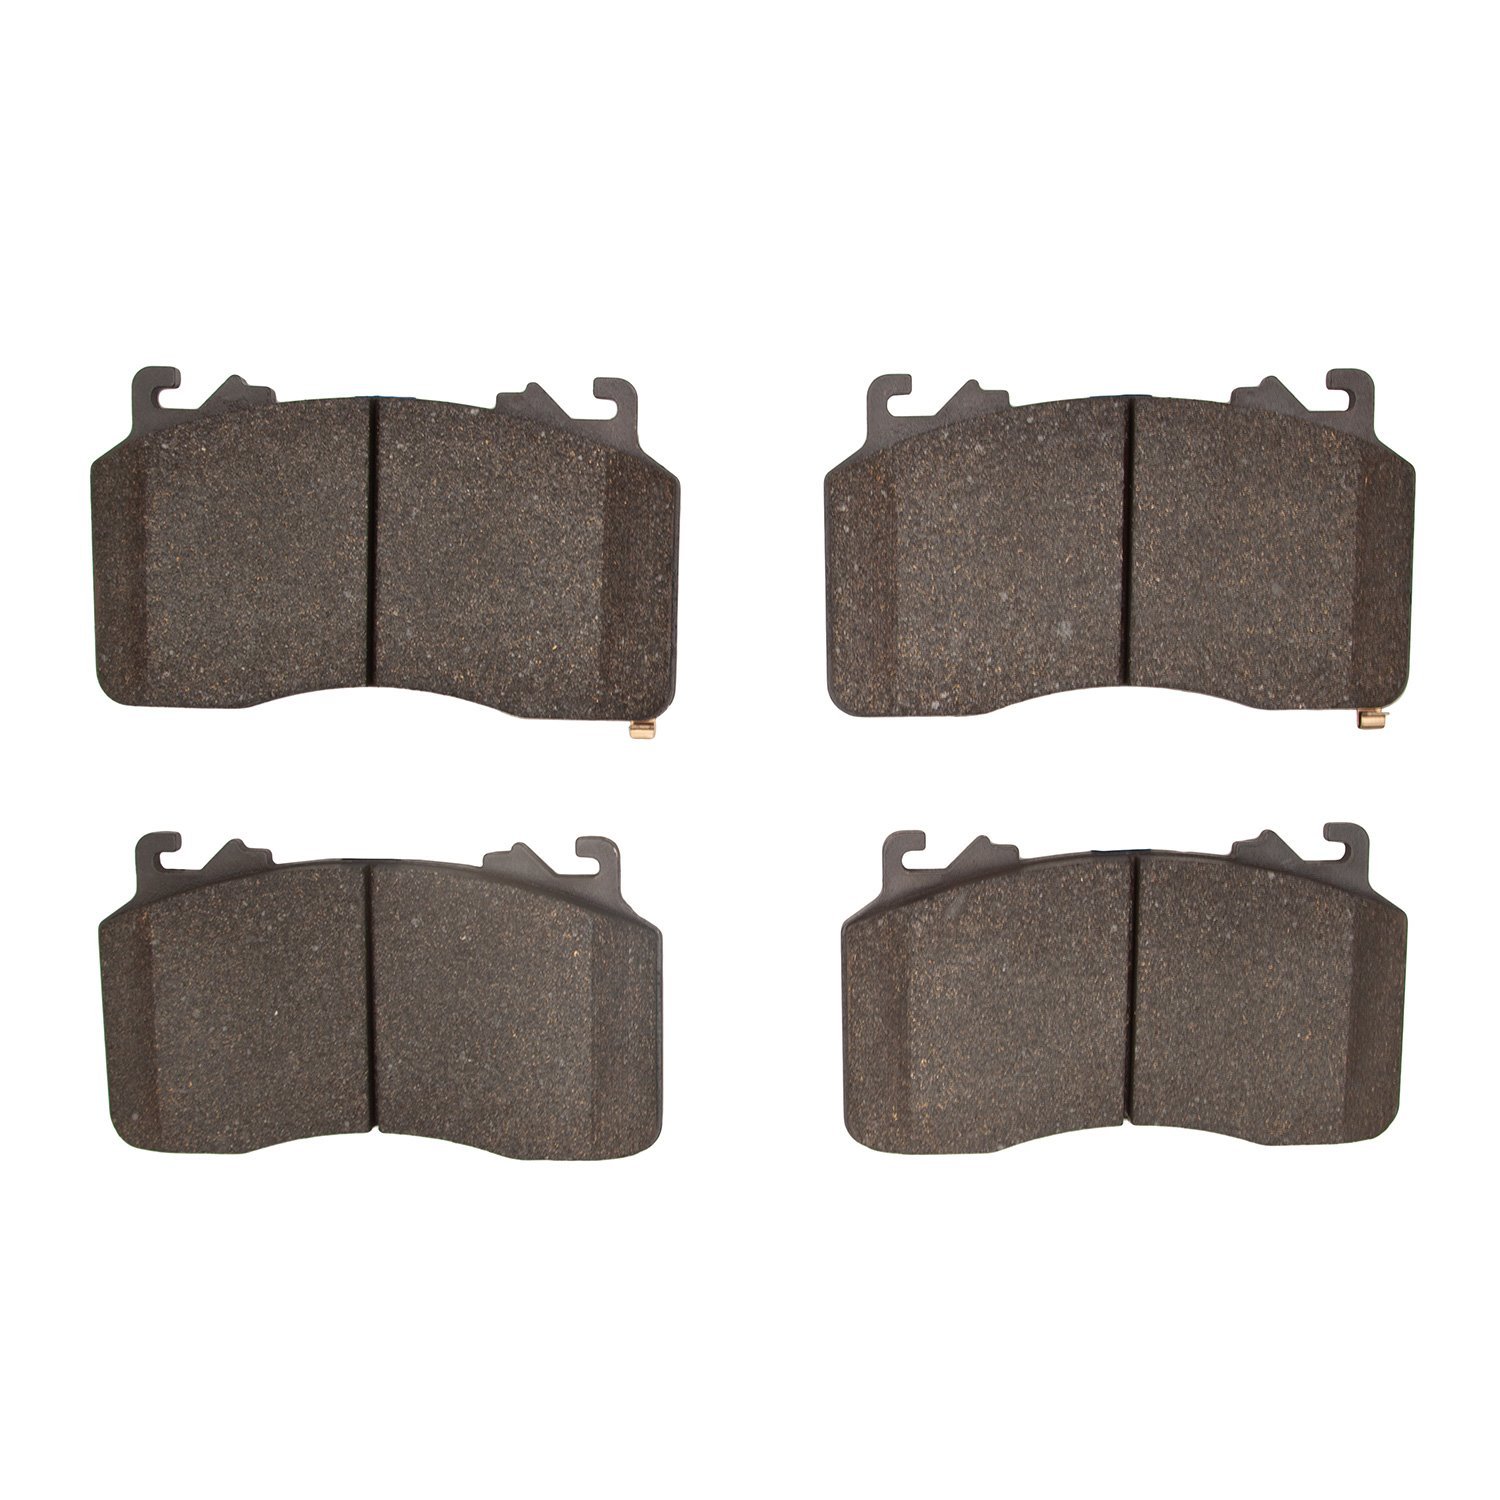 1551-2267-00 5000 Advanced Low-Metallic Brake Pads, Fits Select Ford/Lincoln/Mercury/Mazda, Position: Front